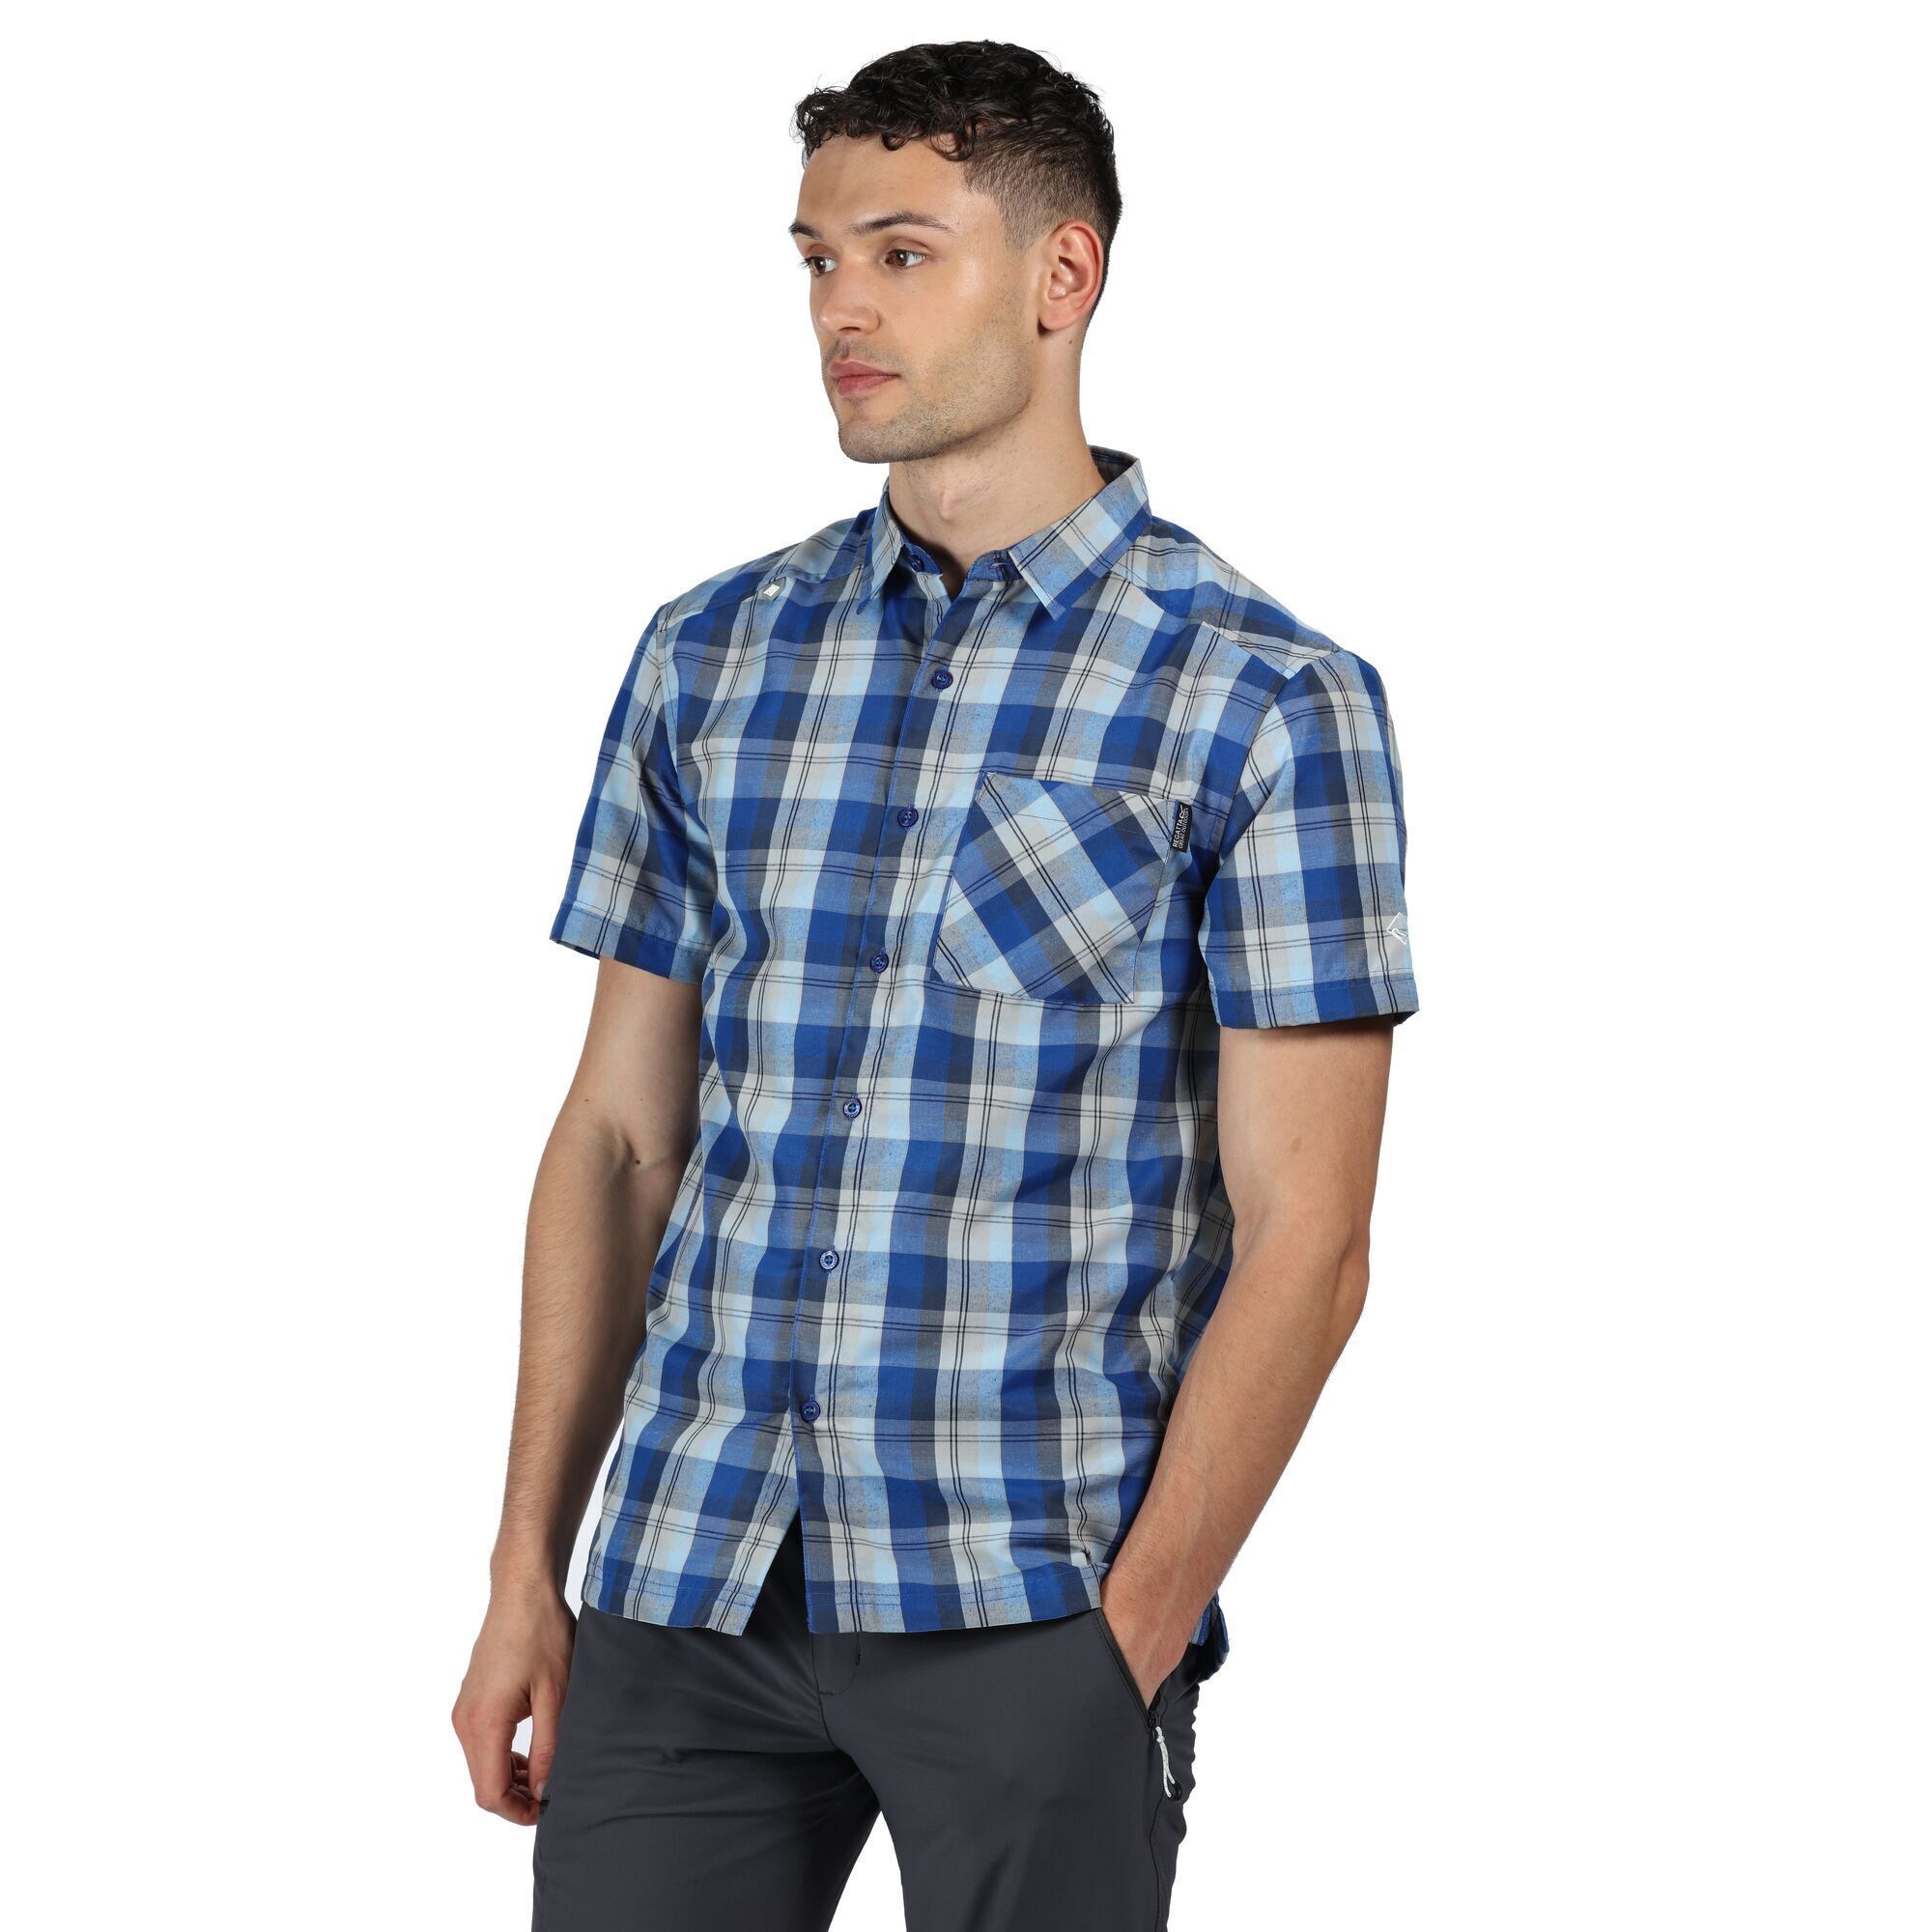 Material: 100% Polyester. Good wicking performance. Quick drying. 1 chest pocket.